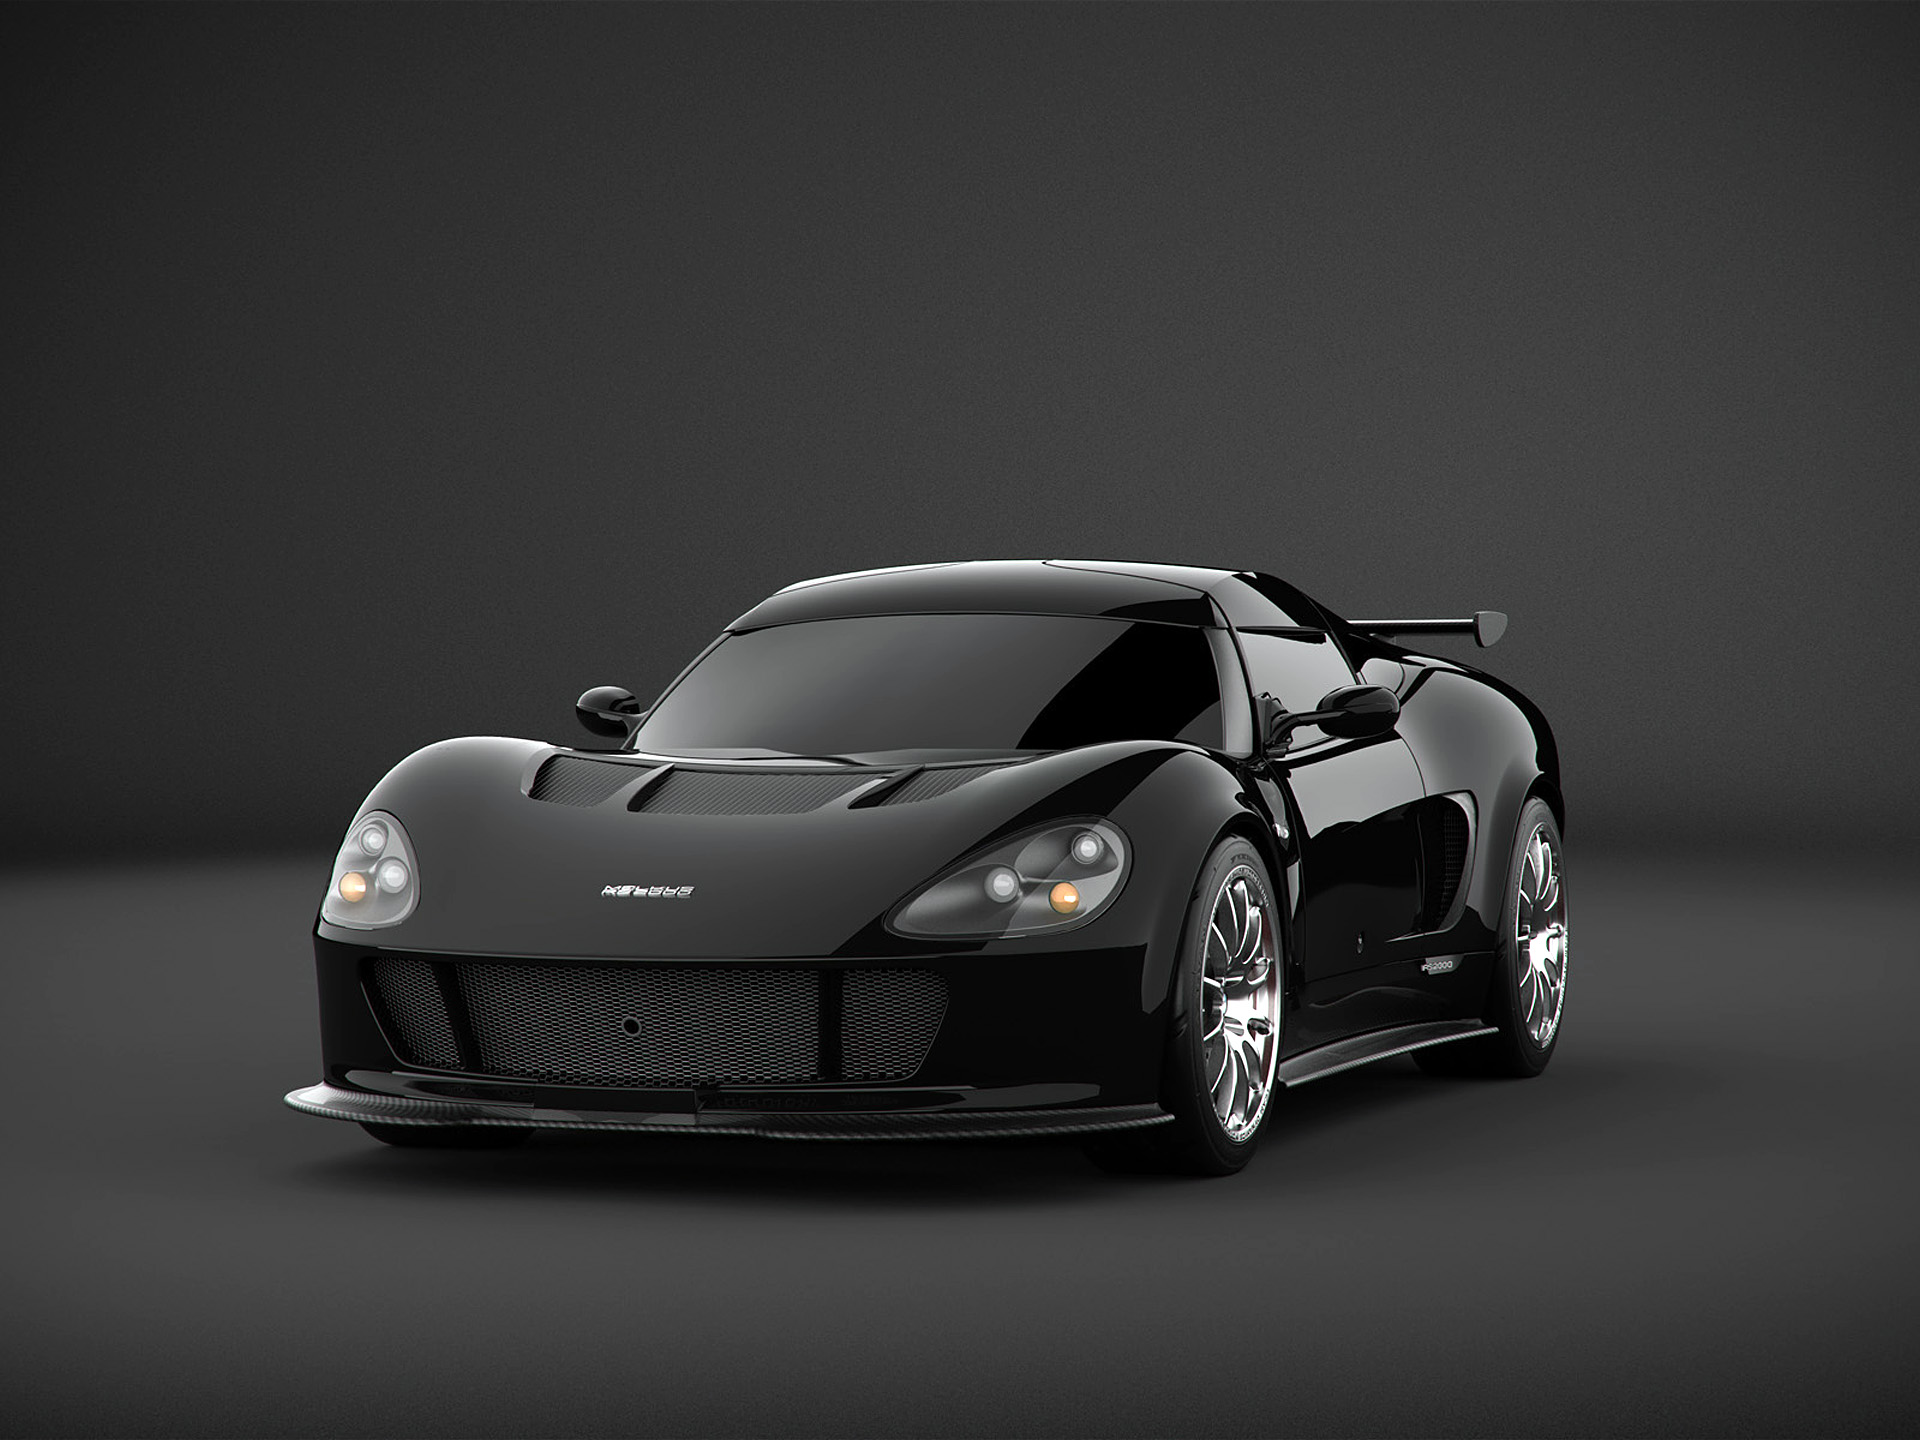 Melkus Rs2000 Black Edition Wallpapers